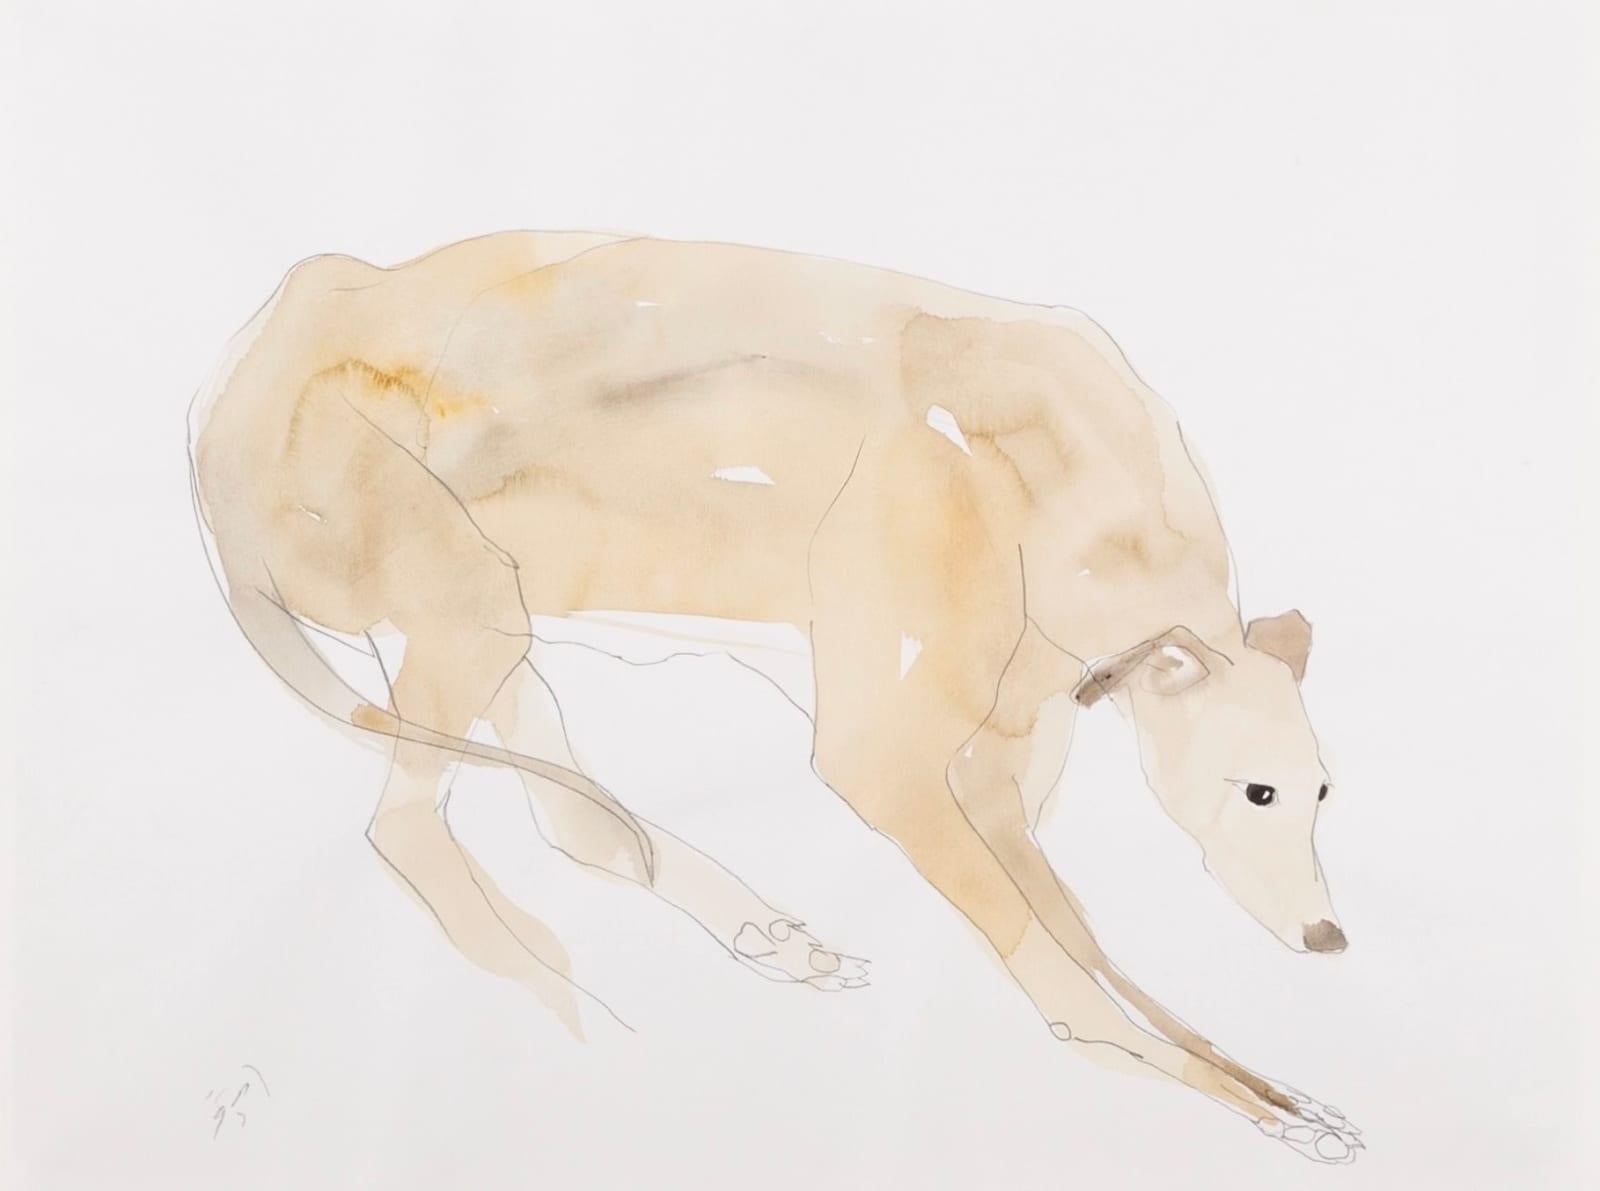 Long Dog I Painting by Keith Purser B. 1944, 1997

Additional information:
Medium: Watercolour and pencil
Dimensions: 36 x 48 cm
14 1/8 x 18 7/8 in
Signed

Keith Purser lives and works on the edge of the desert-like environment of Europe's largest